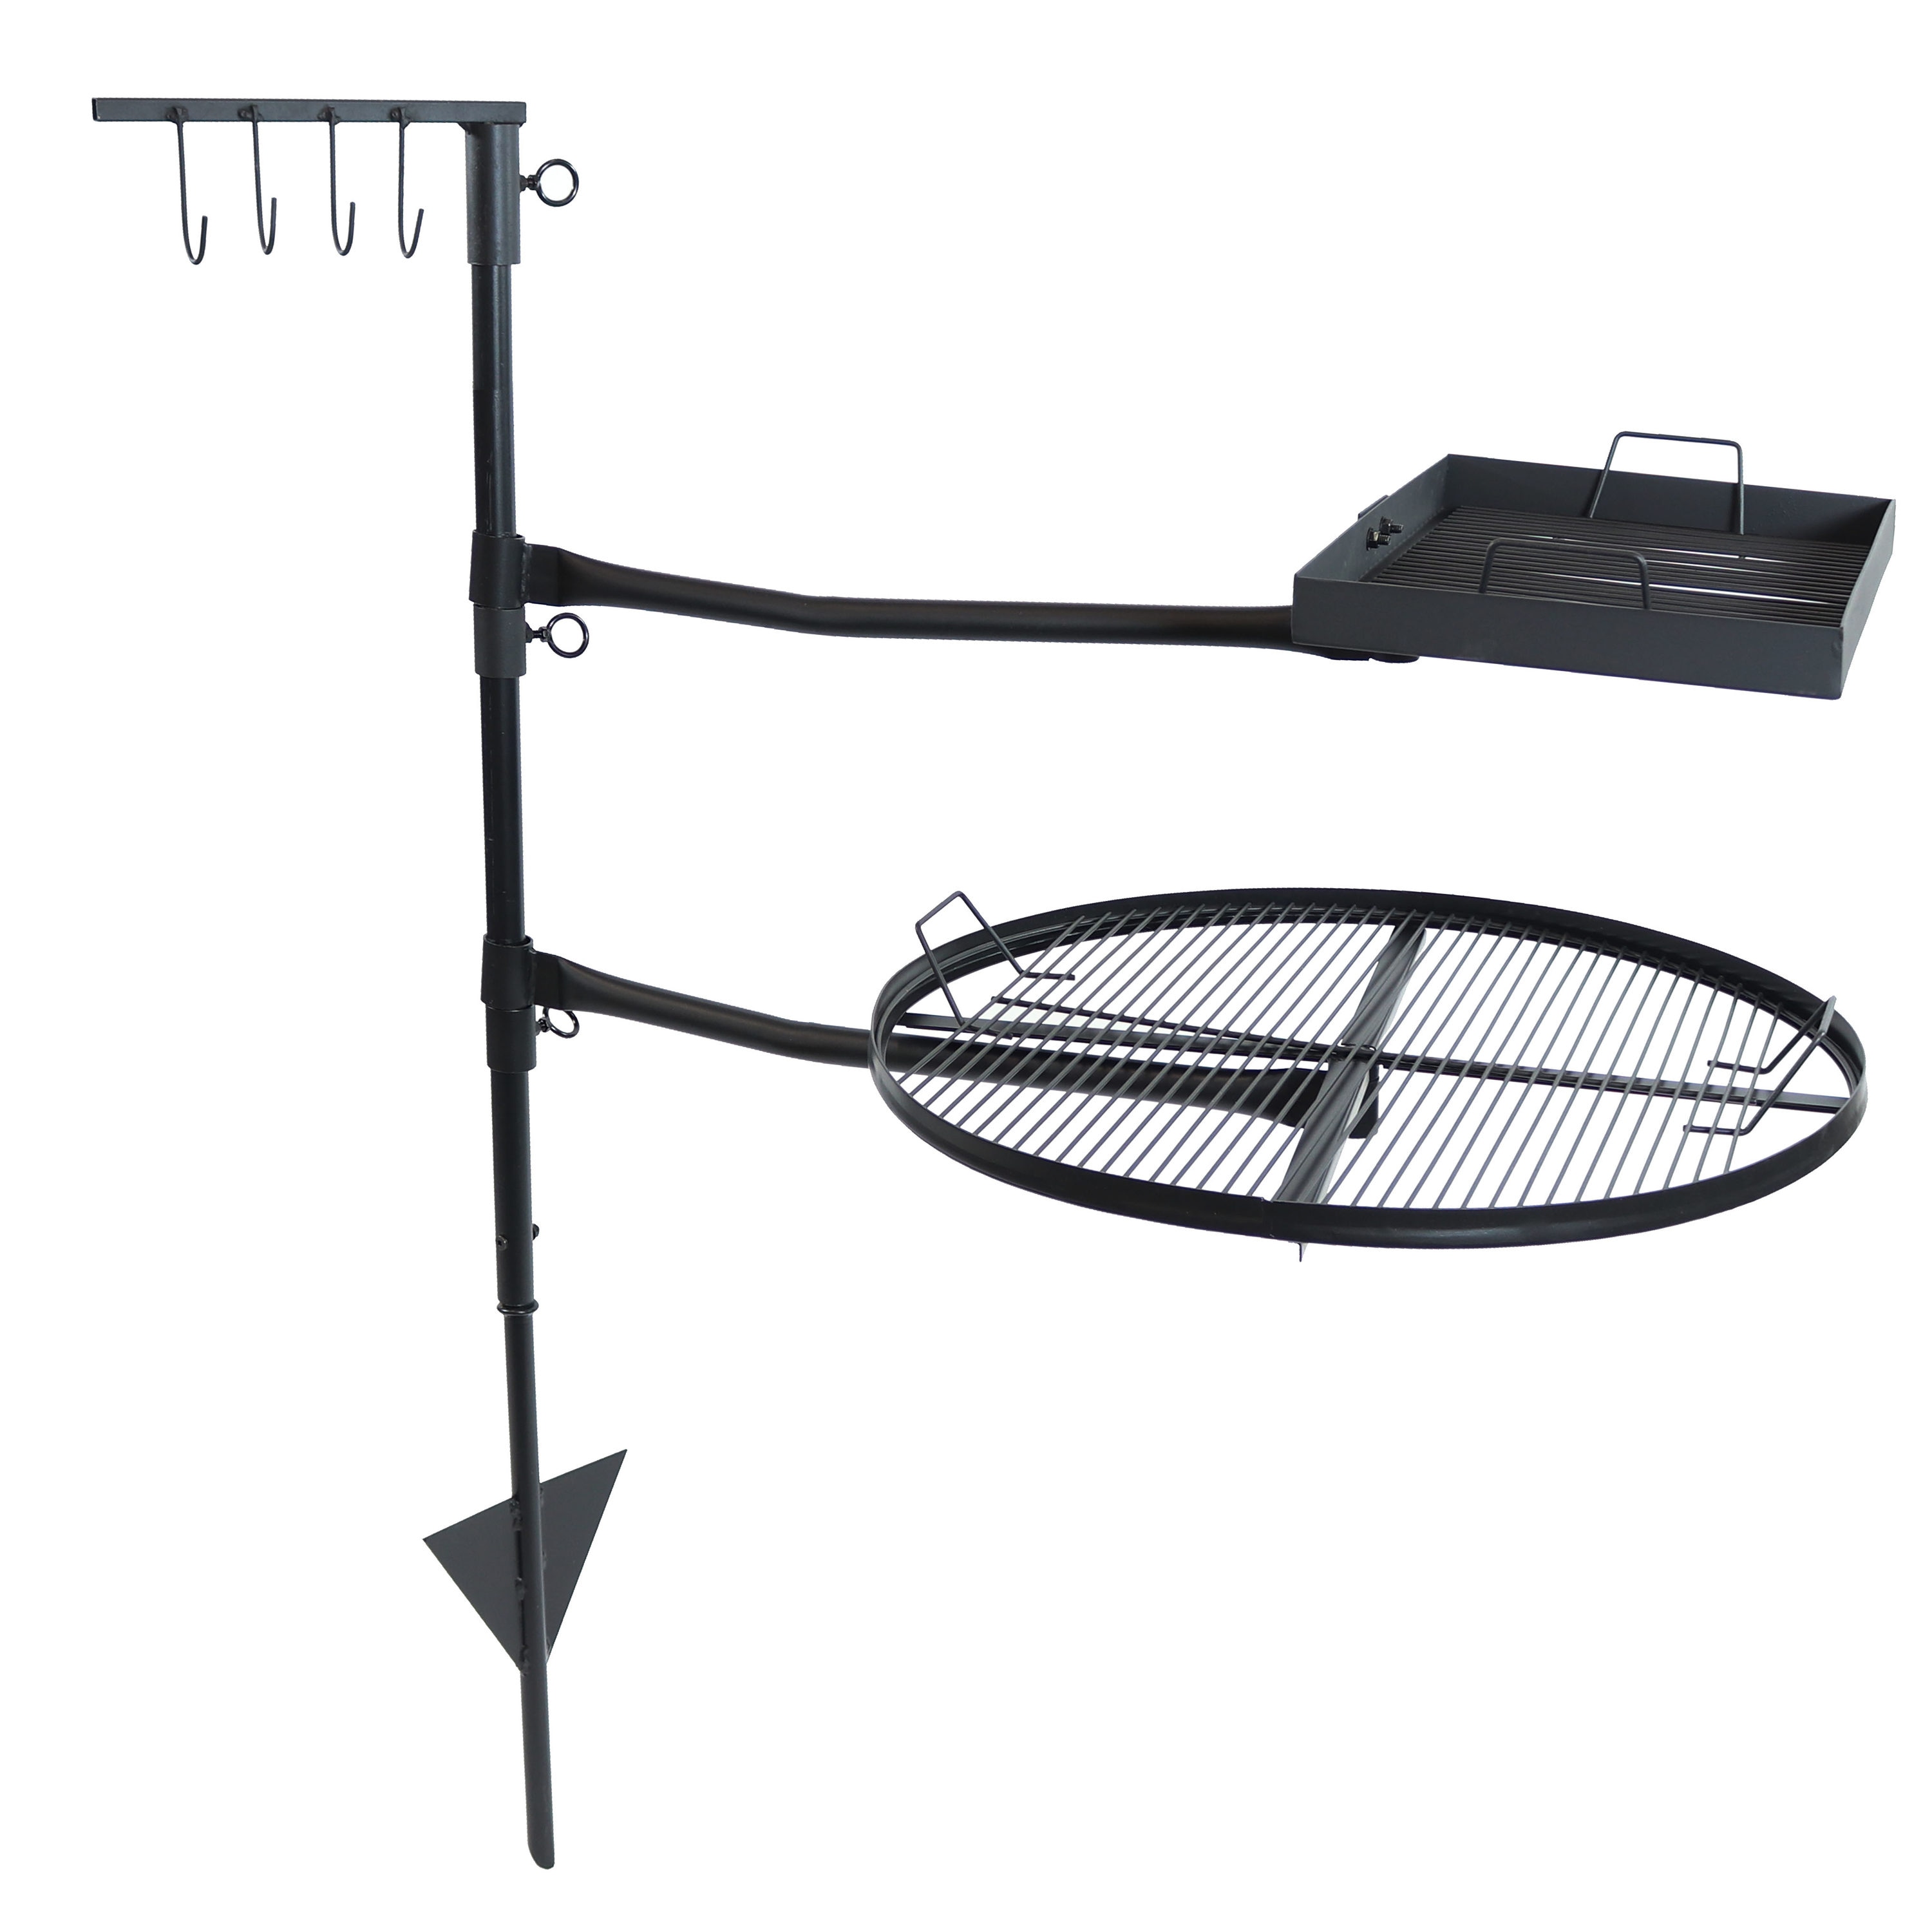 GrillGrate Grill Anywhere Square Grill Grate - BBQ Accessories at Academy Sports